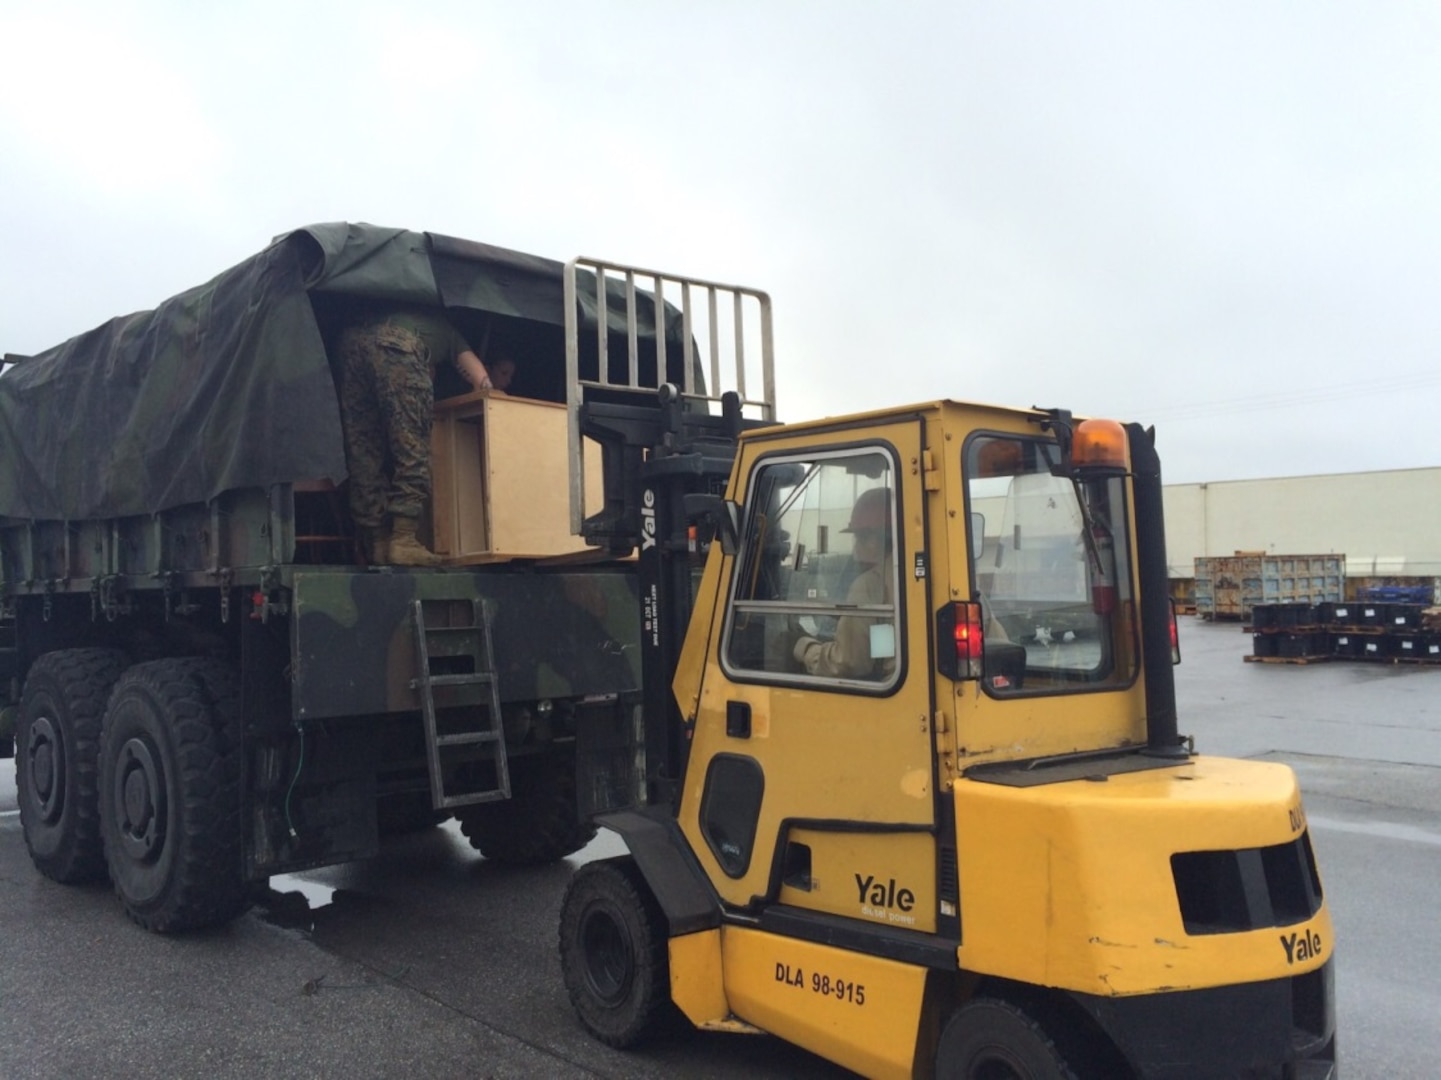 A truckload of couches, chairs, tables and wardrobes from the DLA Disposition Services site at Okinawa, Japan, is readied for shipment to a live fire training area for use by III Marine Expeditionary Force’s Expeditionary Operations Training Group in a live fire training area.